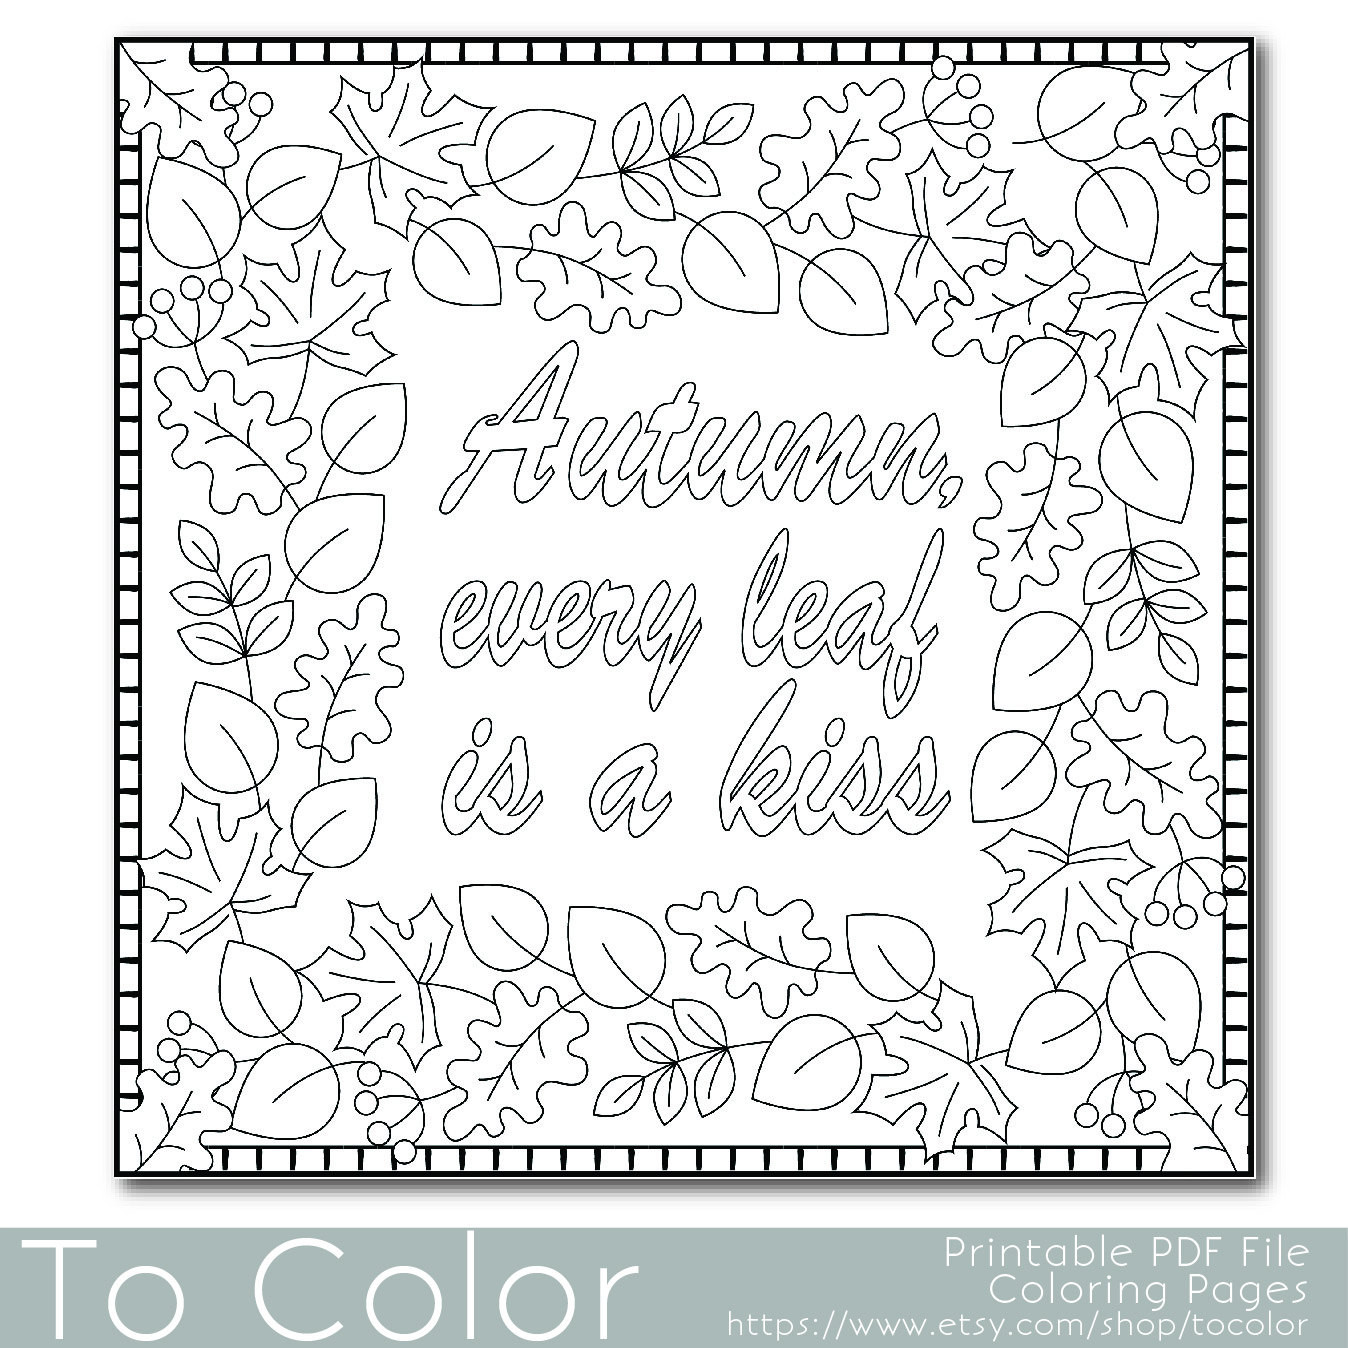 Autumn Coloring Pages For Adults
 Autumn Leaves Coloring Page for Adults PDF JPG by ToColor